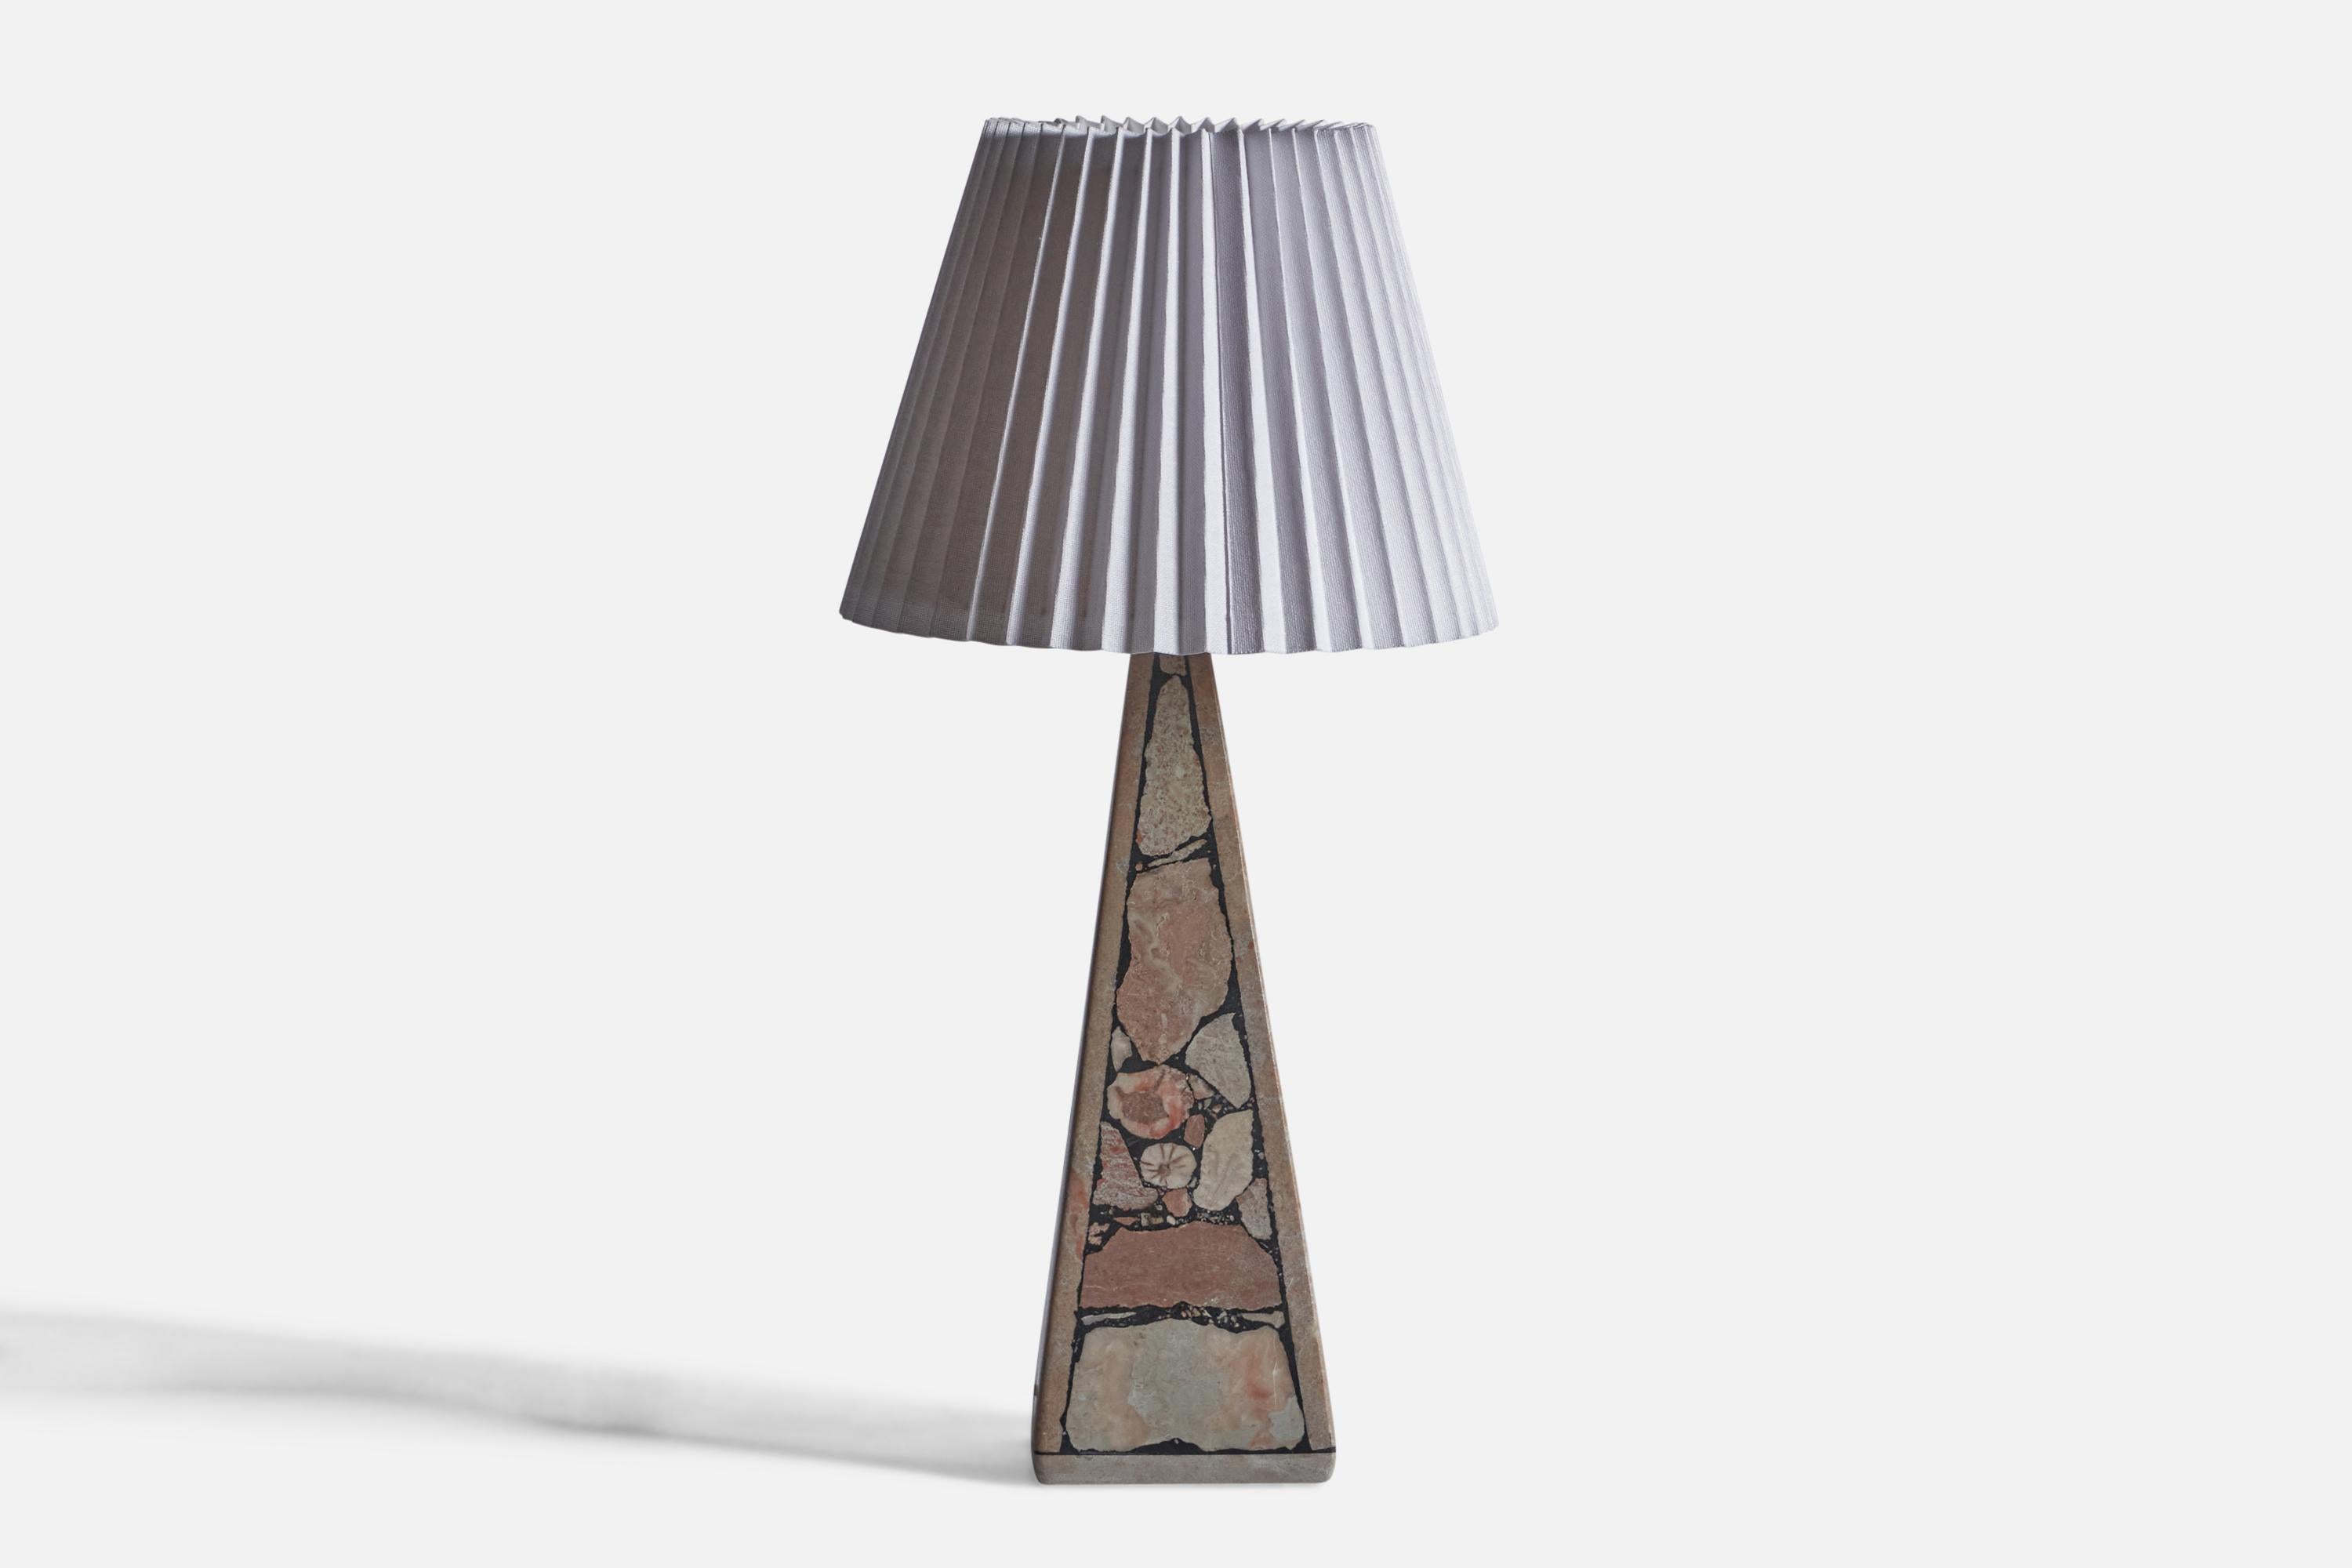 A fossil stone and paper table lamp, designed and produced in Gotland, Sweden, c. 1970s.

Sold with Lampshade. Dimensions stated are of table Lamp with Lampshade.